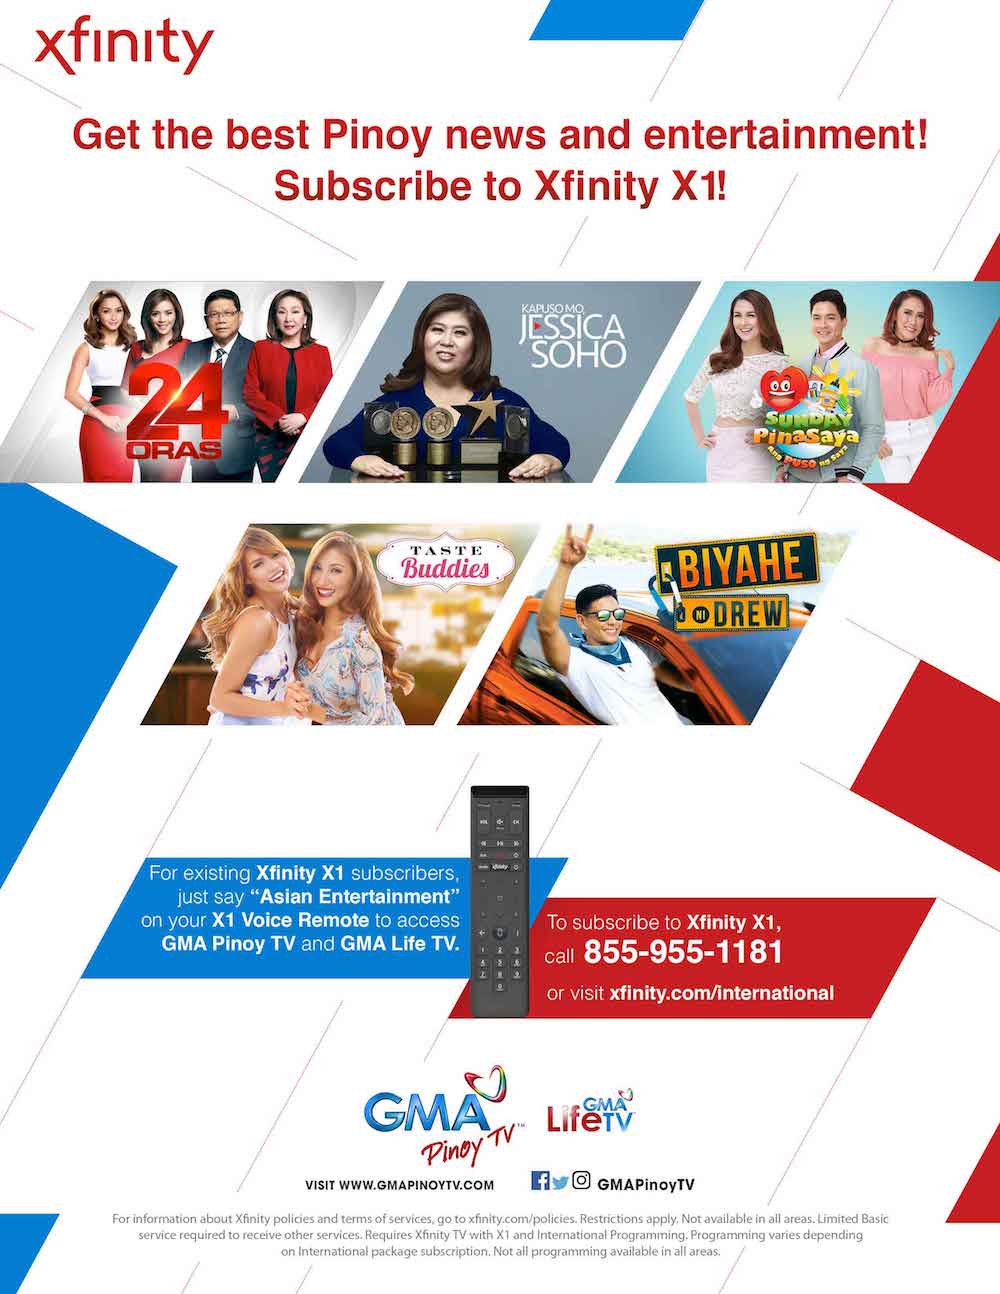 New And Existing Customers Of Xfinity X1 Can Purchase Gma Pinoy Tv Life On Com Simply Say Into